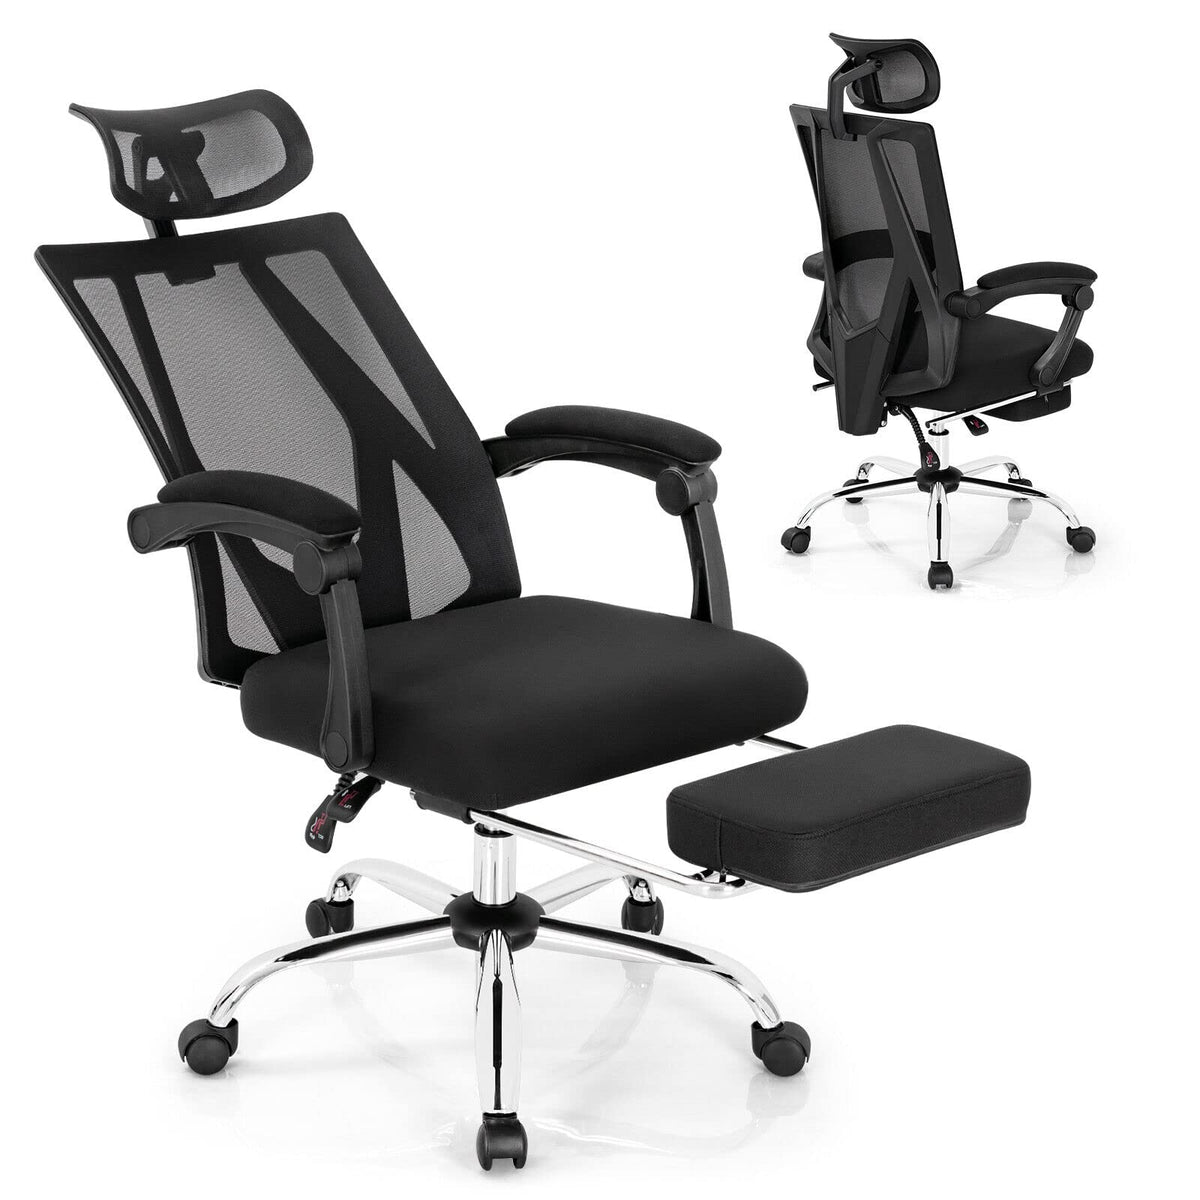 Giantex Ergonomic Office Chair with Footrest